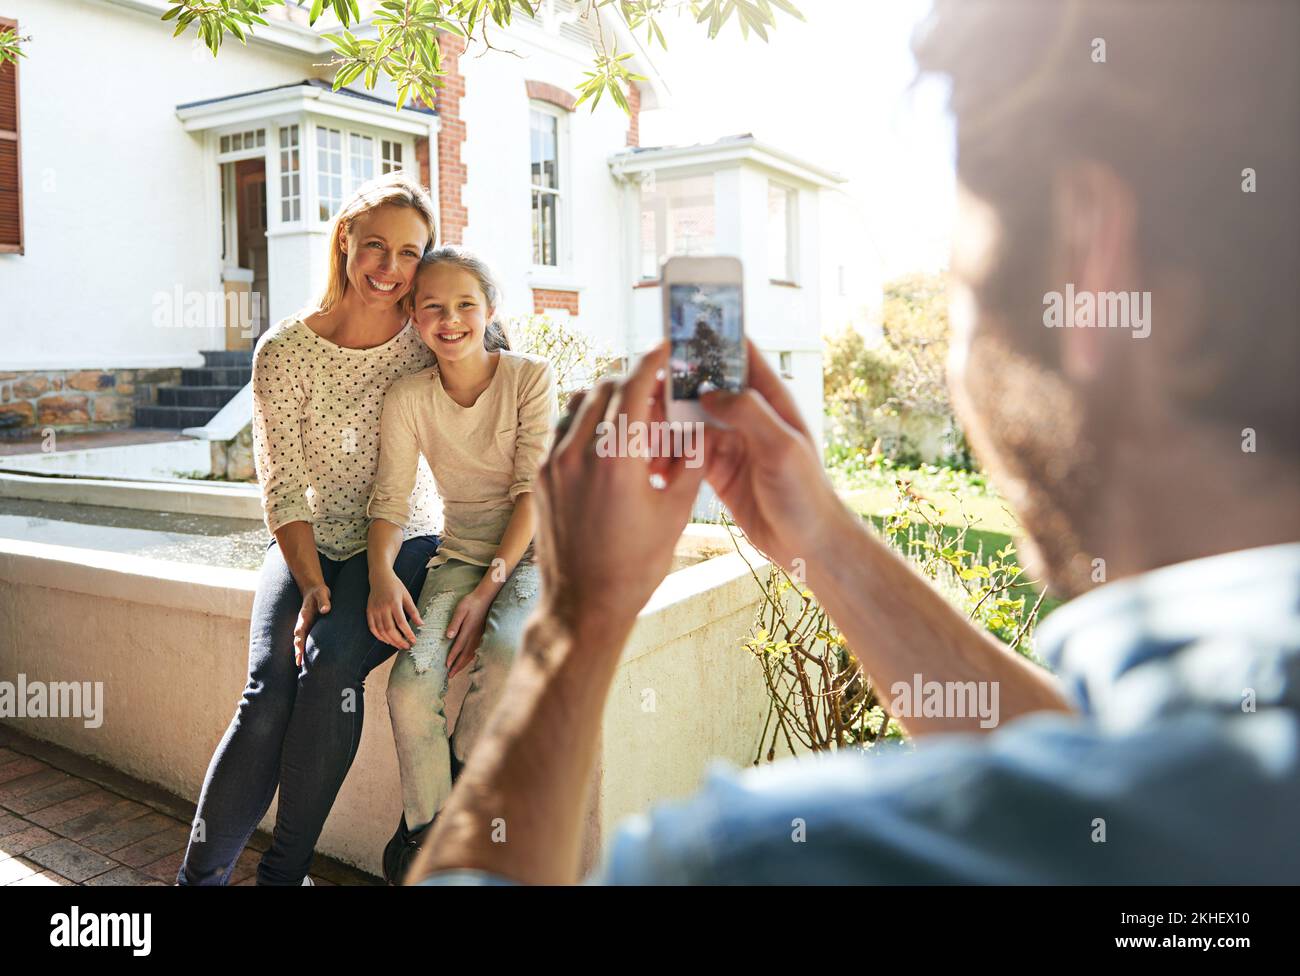 Its the little moments that make life big. A man using his smartphone to take a photo of his family sitting outdoors. Stock Photo